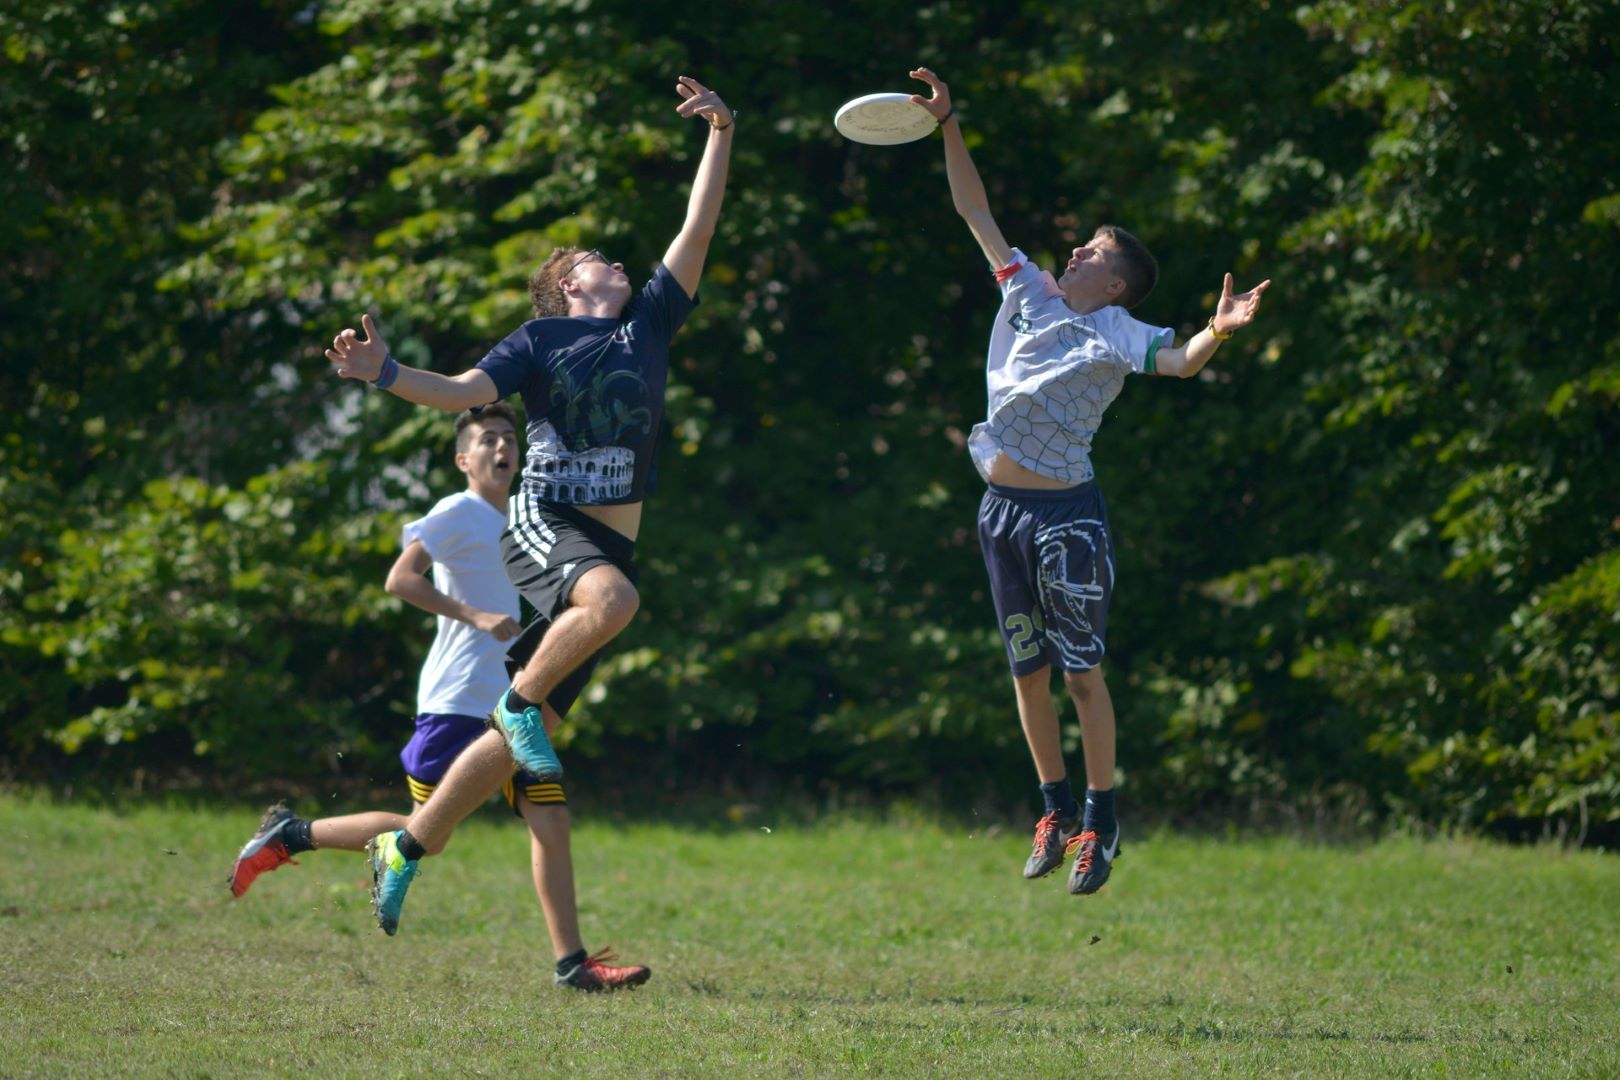 How Many Points Is A Touchdown Worth In Ultimate Frisbee?